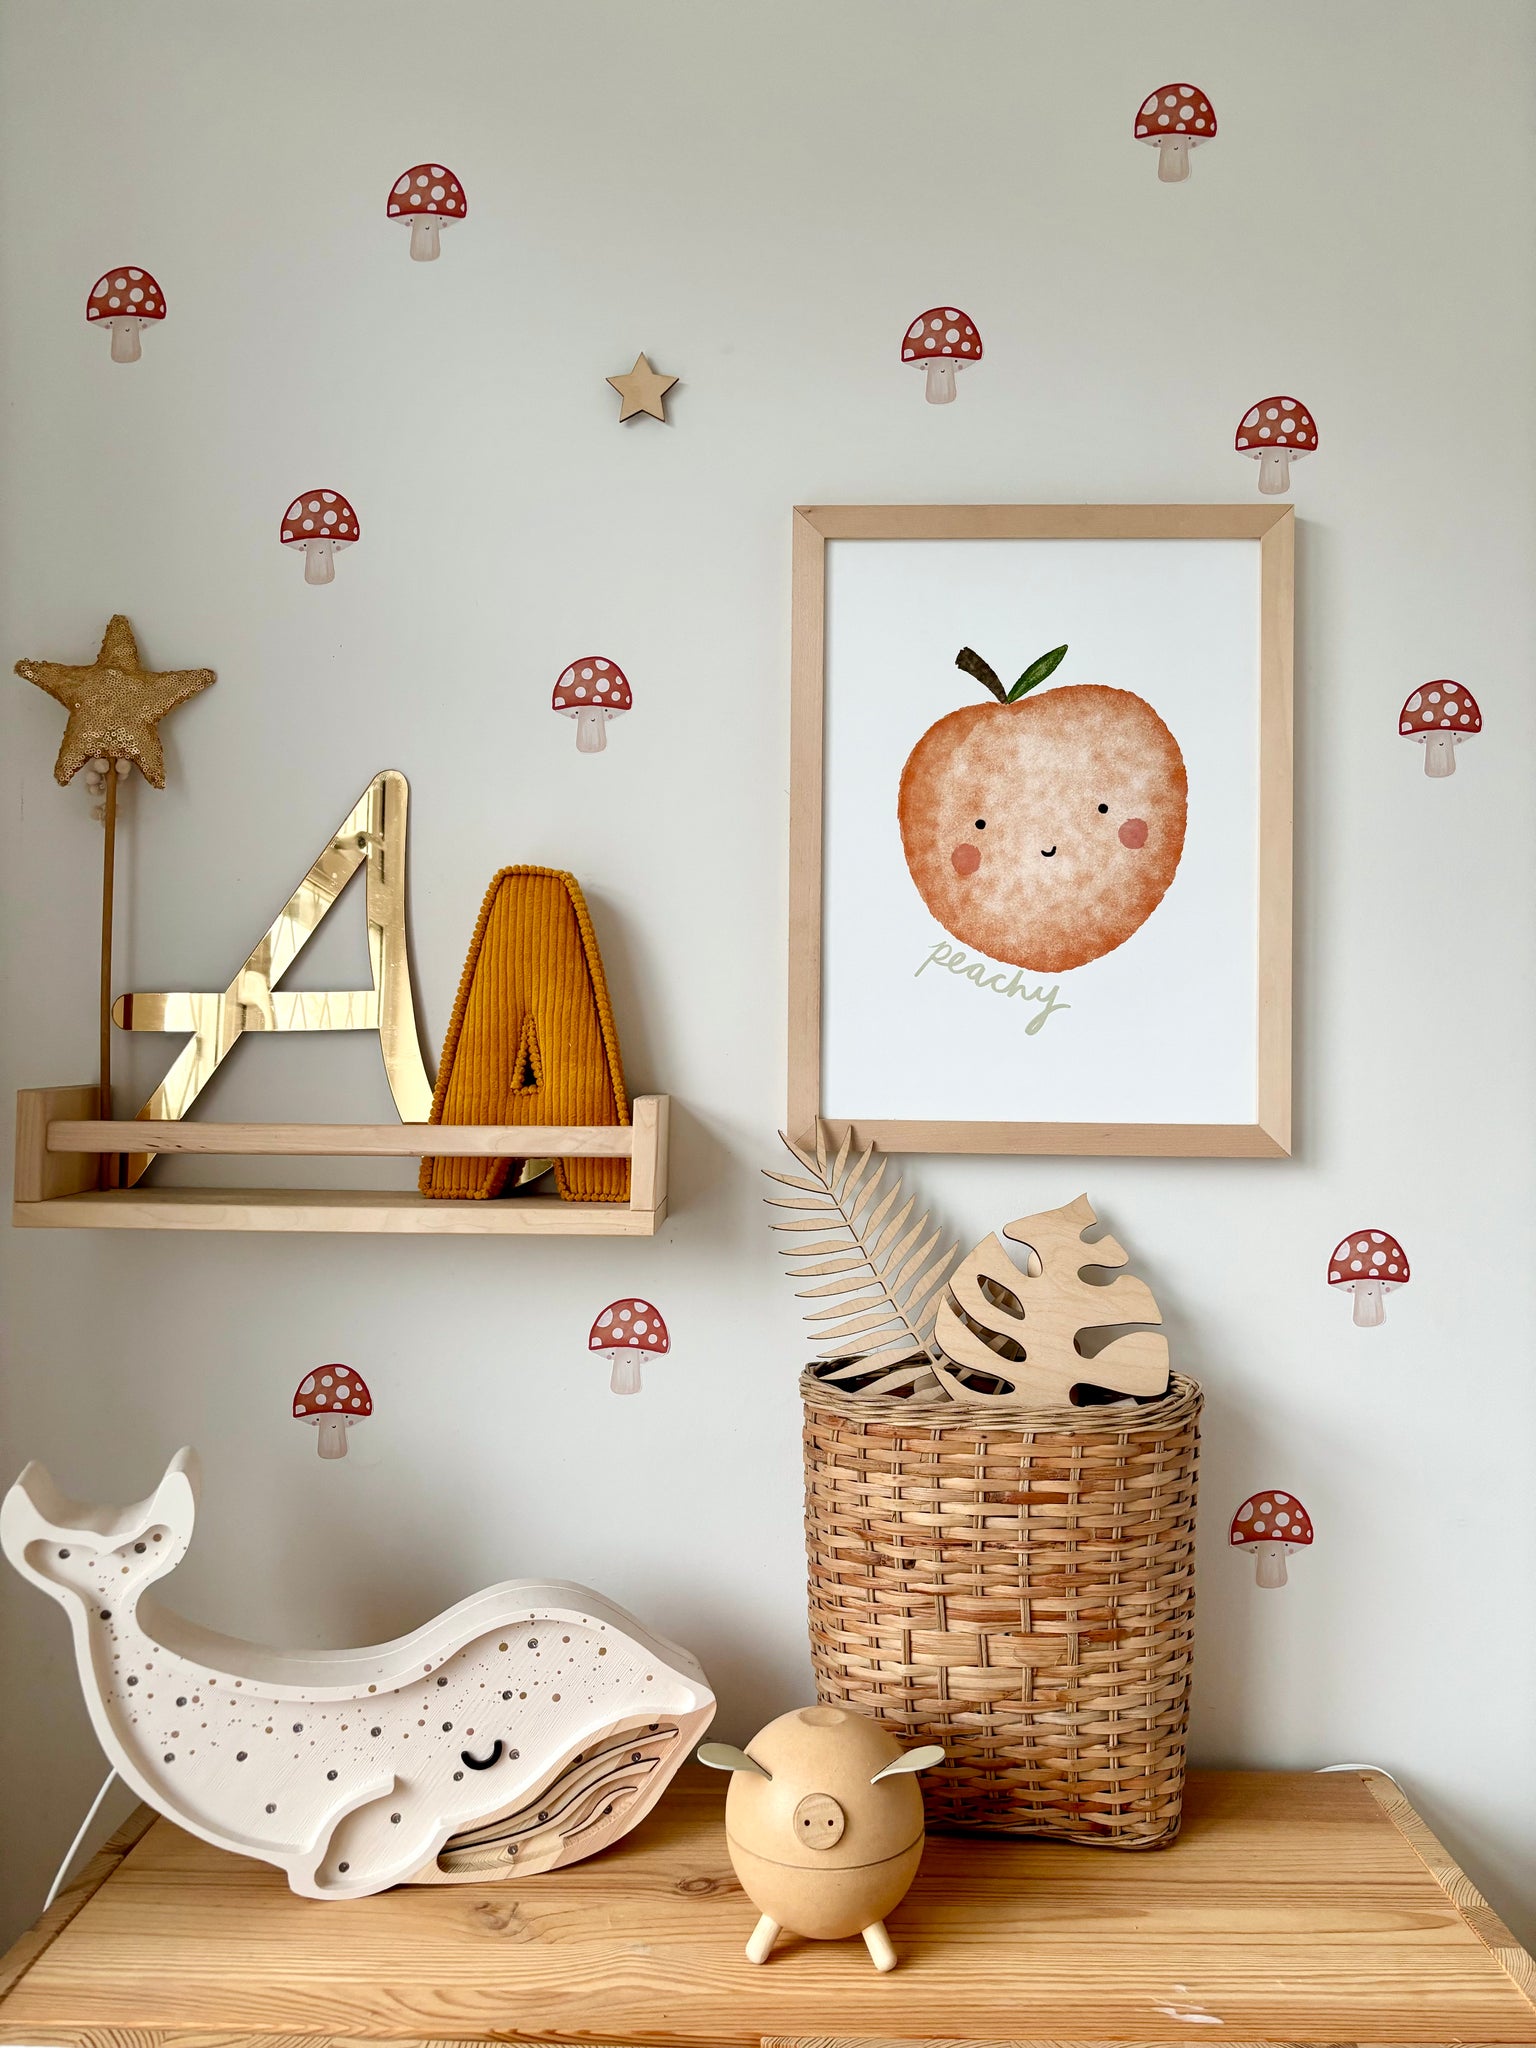 Toadstool (with faces) Wall Stickers - Fabric, Reusable and Eco-Friendly